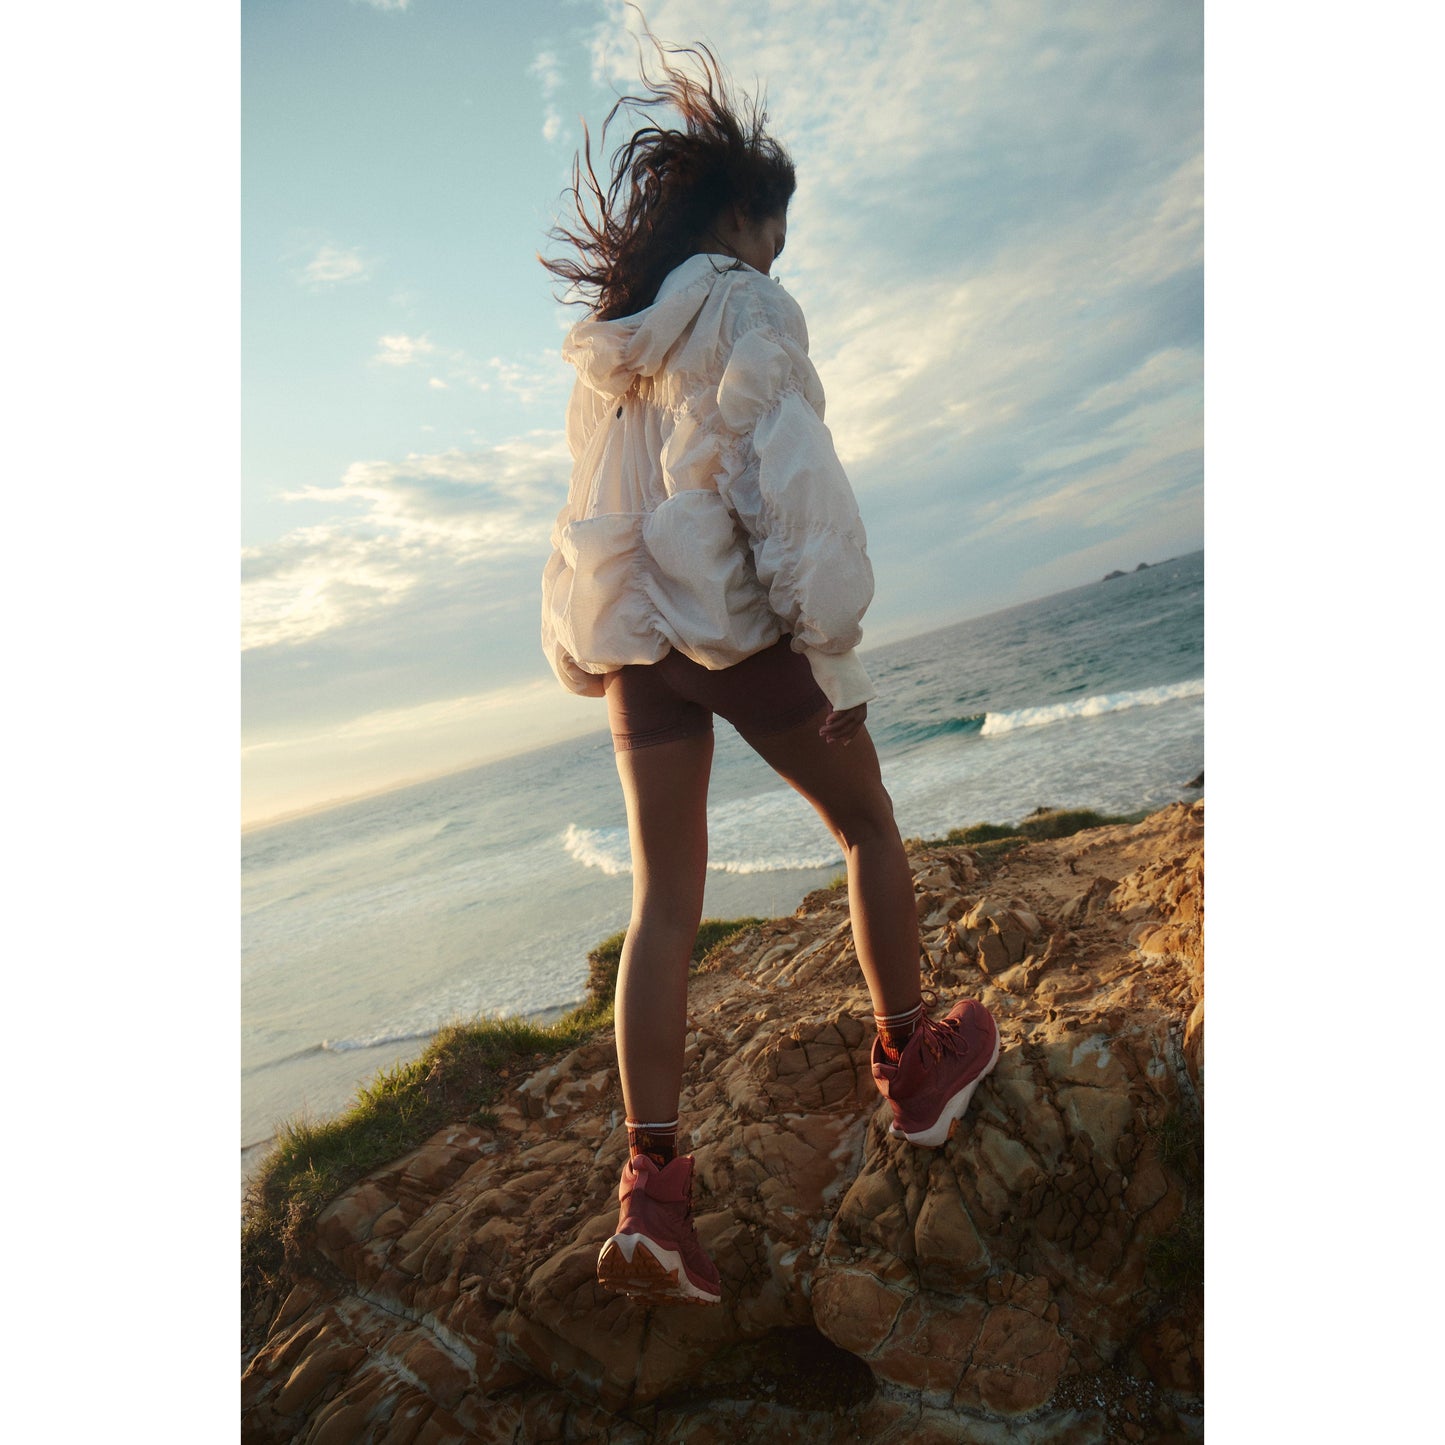 Woman in a Free People Movement Happy Camper Pullover in Bleached Clay and shorts jumping on a rocky shoreline, with the ocean in the background at sunset.